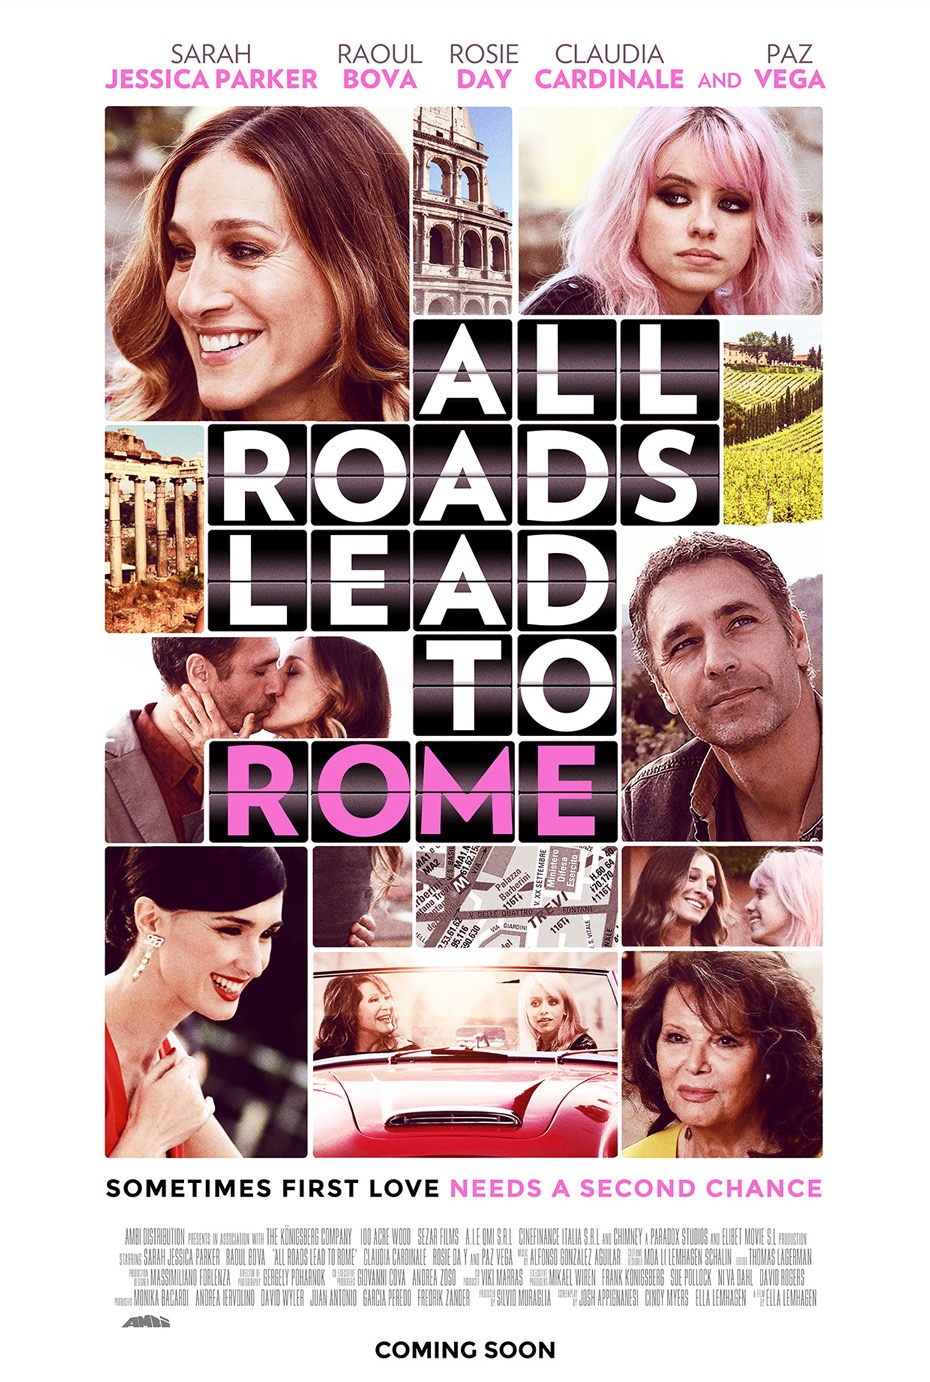 All Roads Lead To Rome, trailer